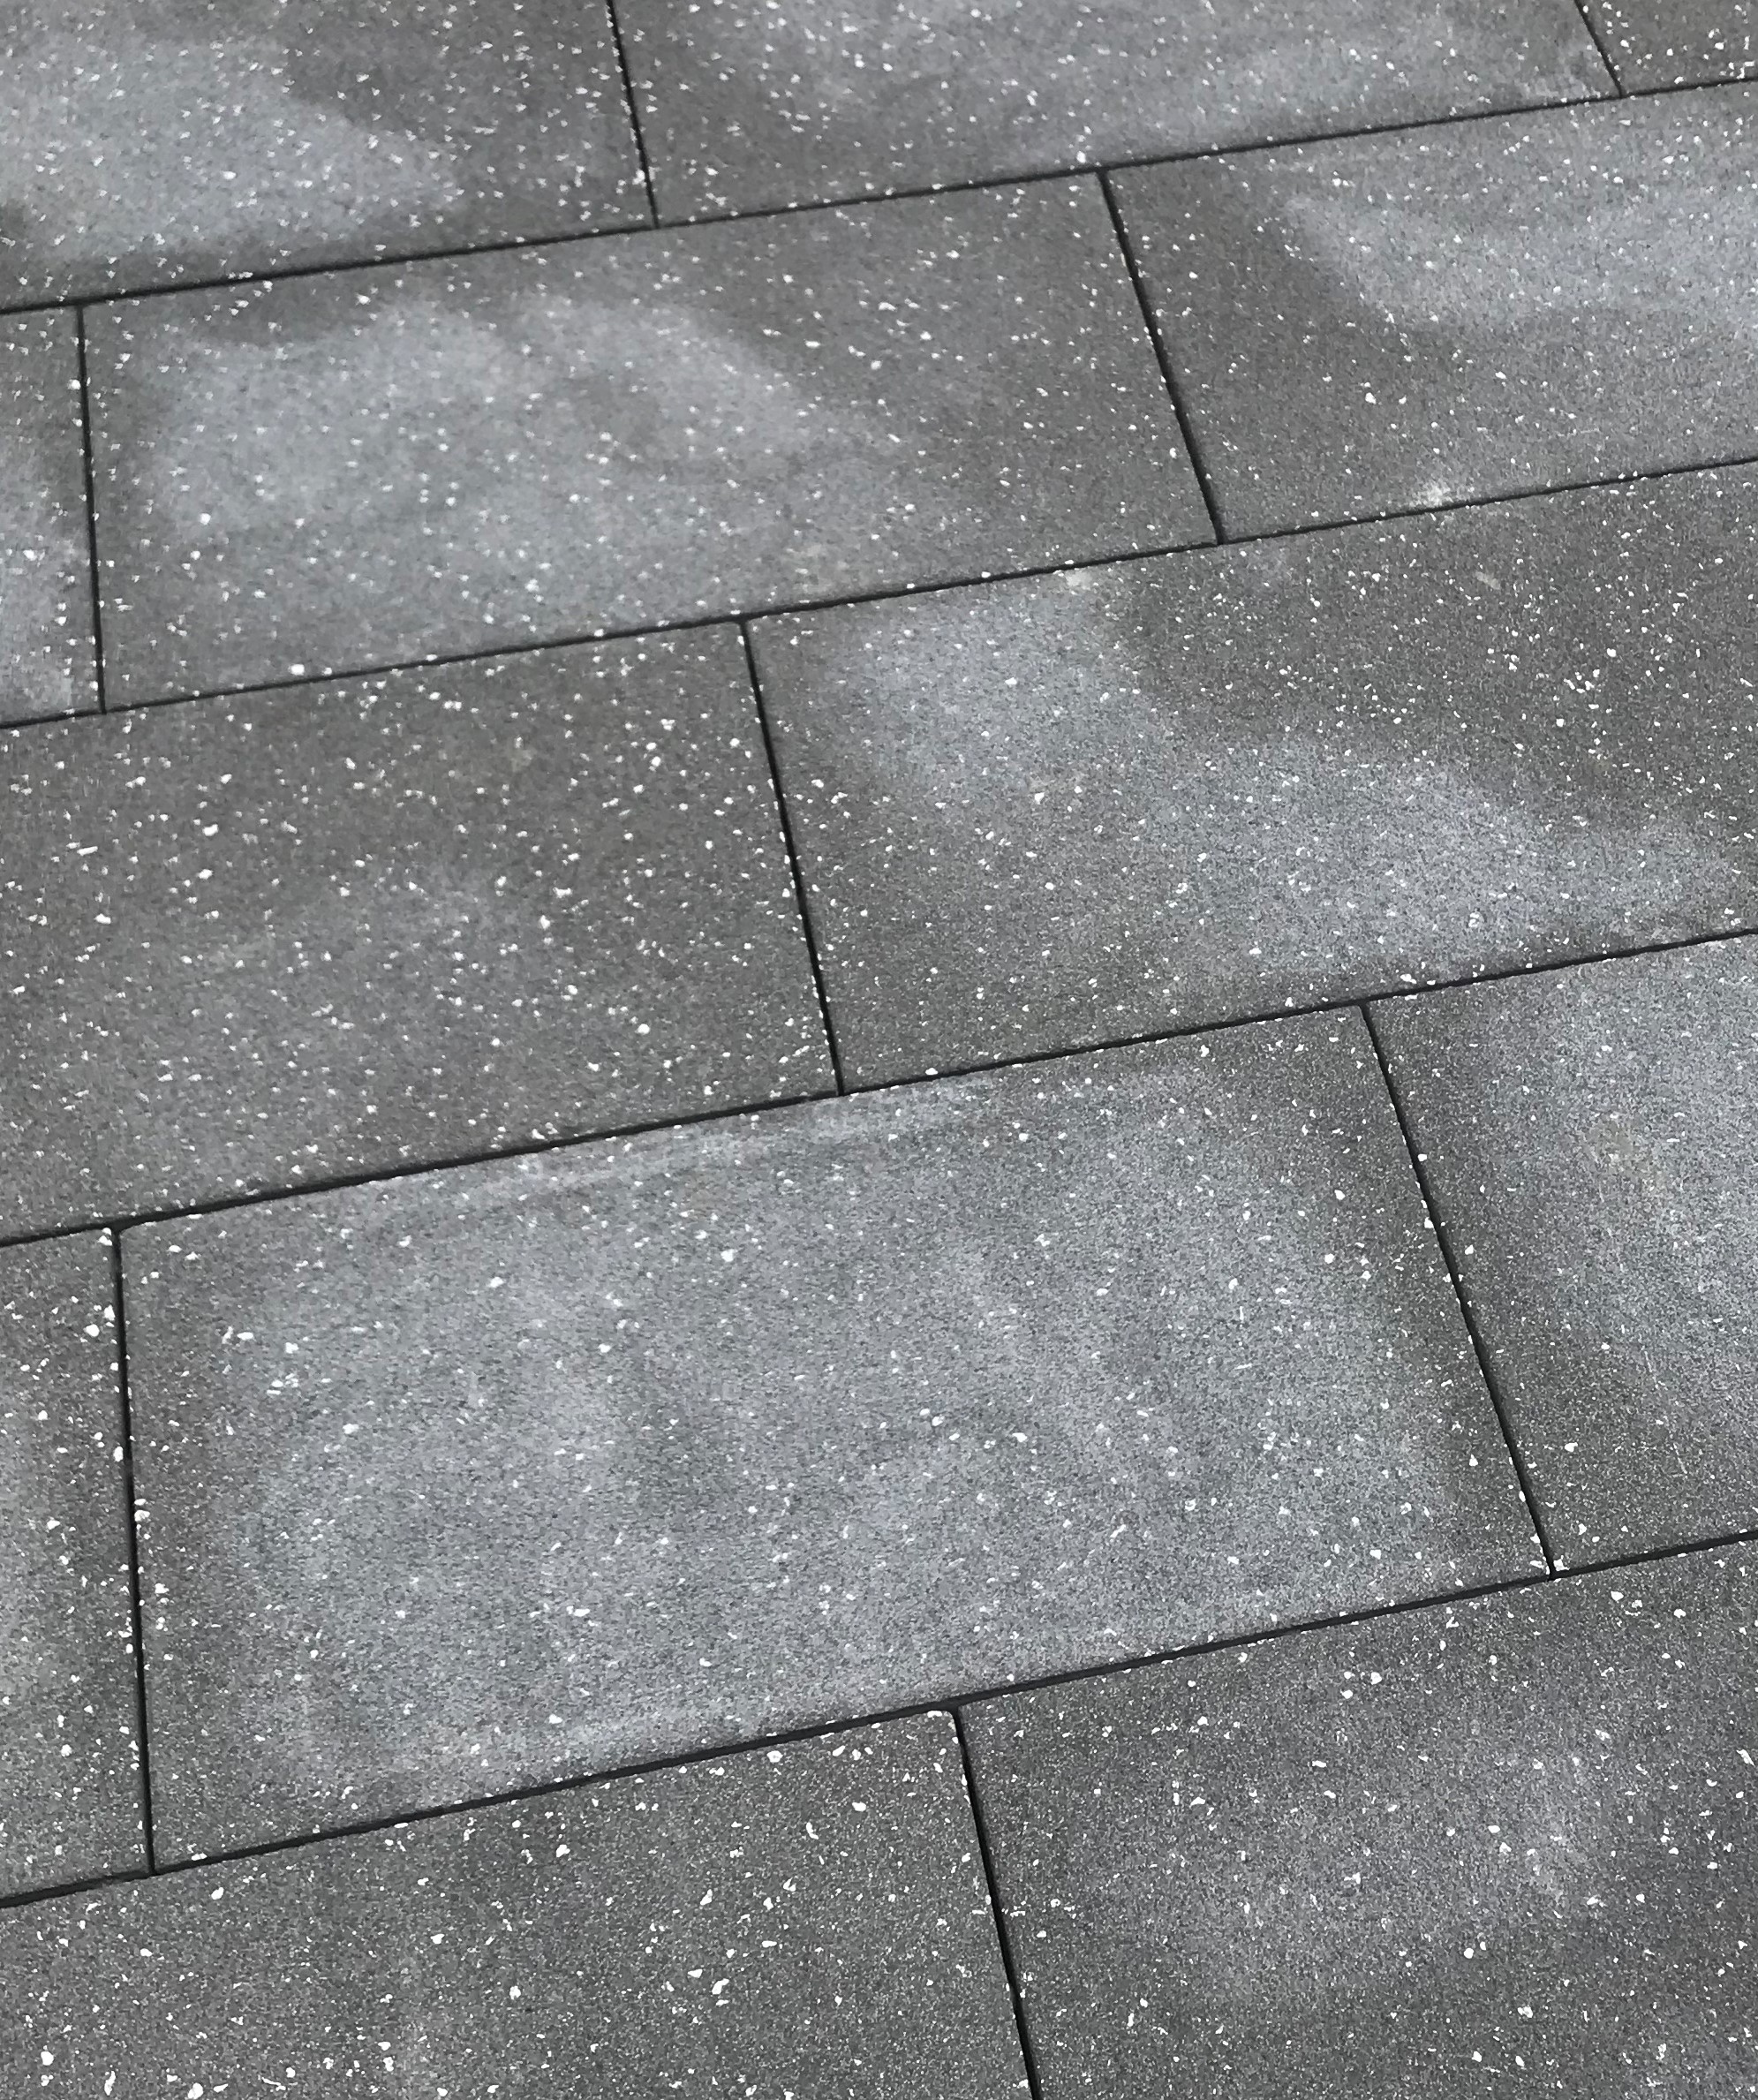 Dark gray, rectangular concrete pavers with lighter areas of efflorescence and white specks.